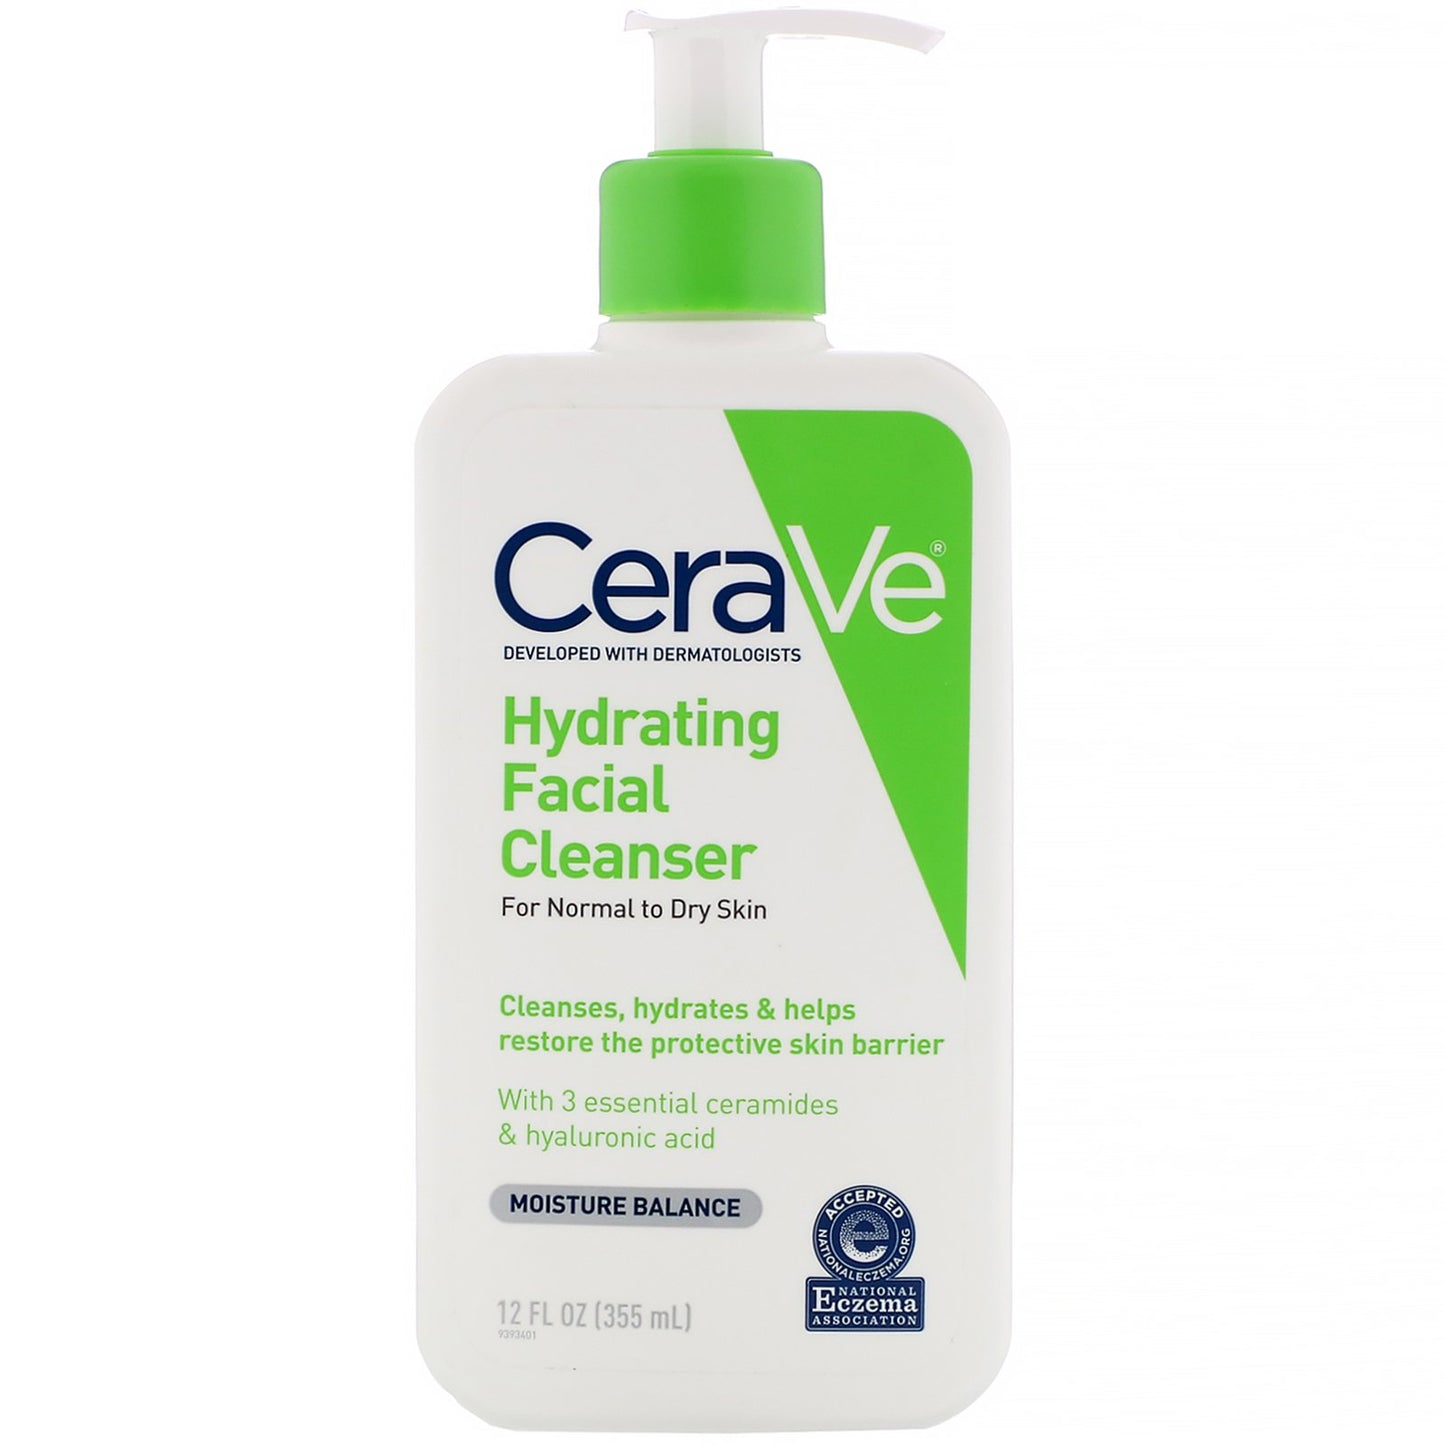 Cerave Hydrating Facial Cleanser 12oz